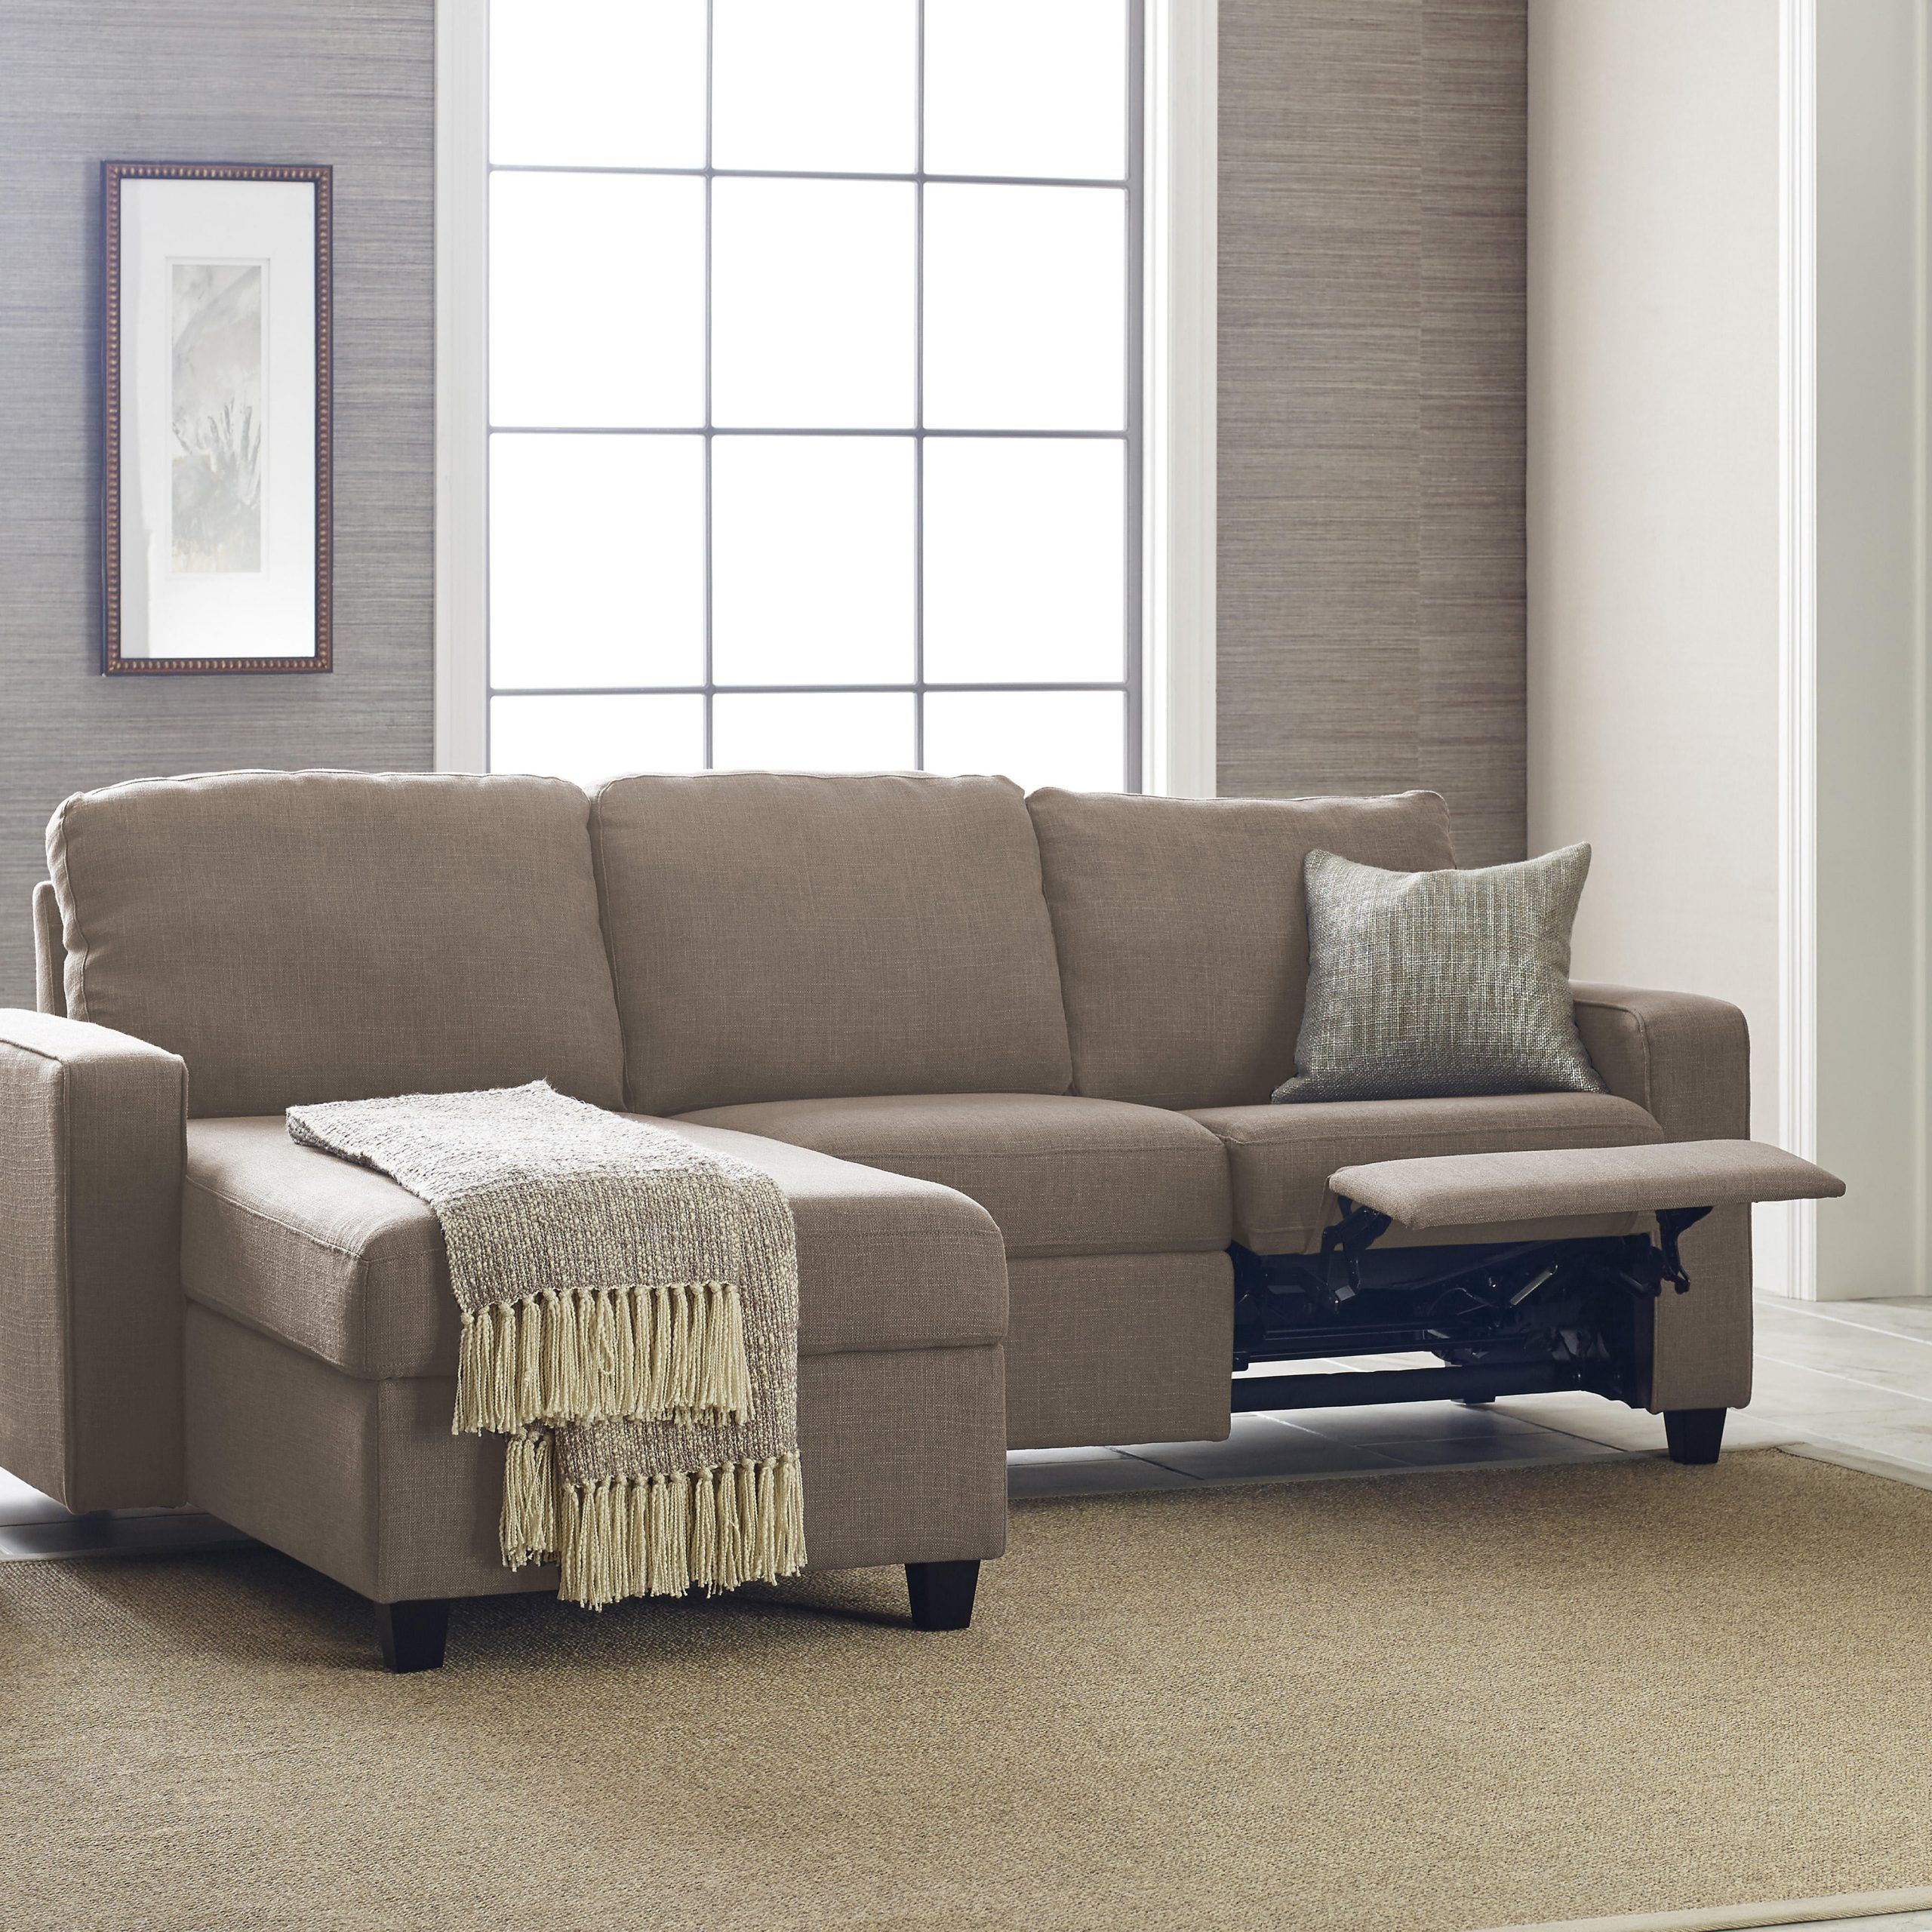 Serta Palisades Reclining Sectional With Right Storage Chaise – Beige Intended For Small L Shaped Sectional Sofas In Beige (Gallery 17 of 20)